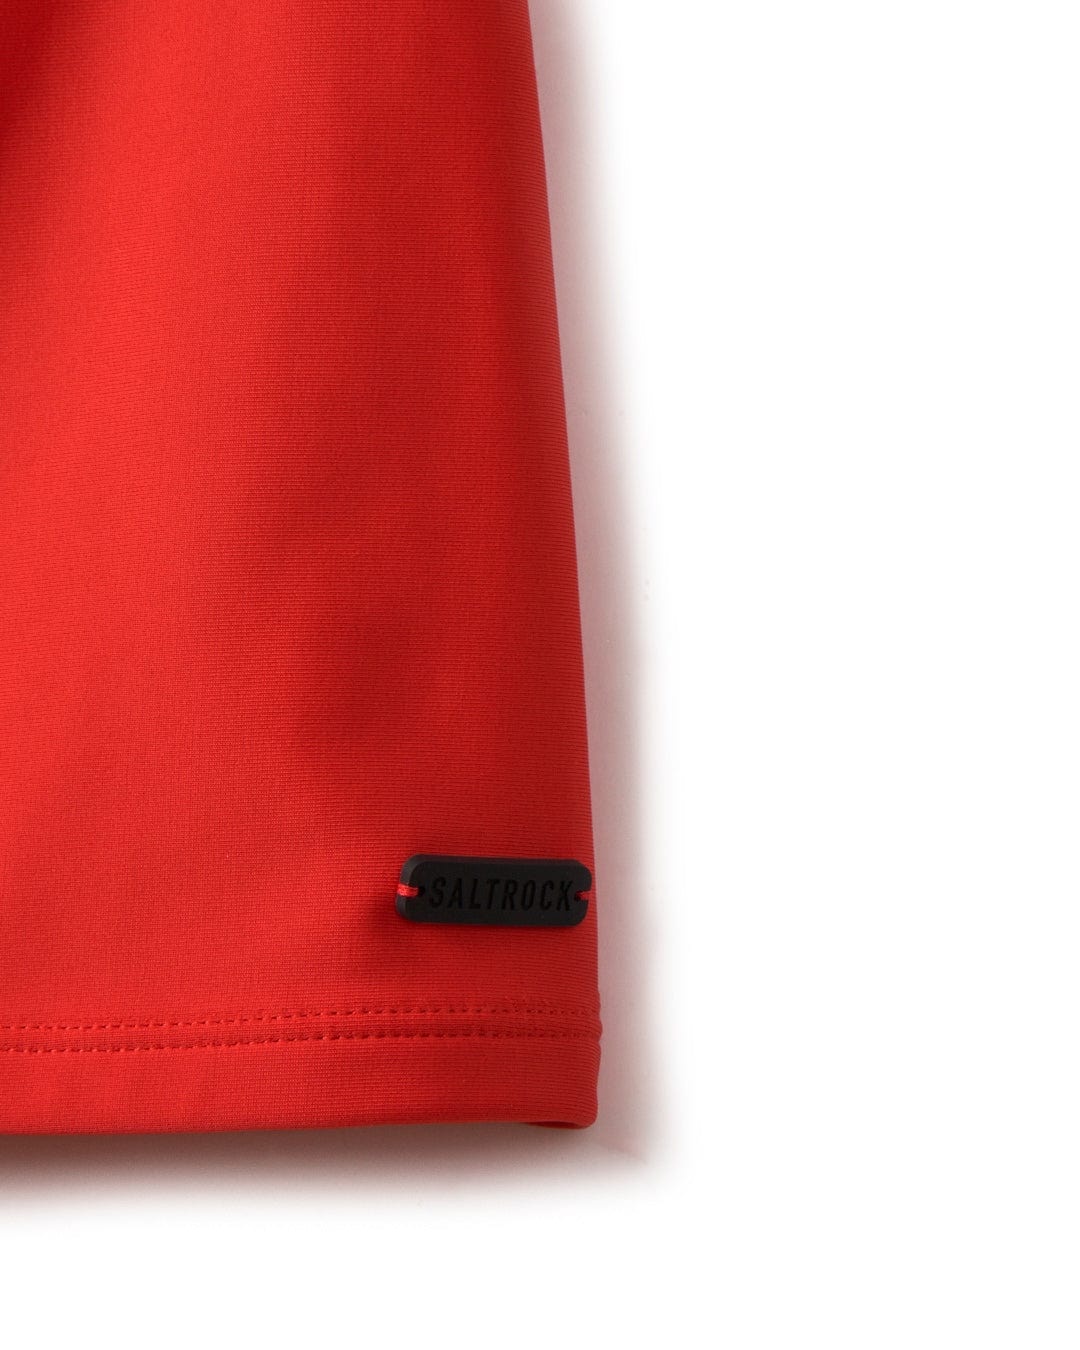 Close-up of a red fabric with a black "Saltrock" label on the hem, crafted from recycled fibers.